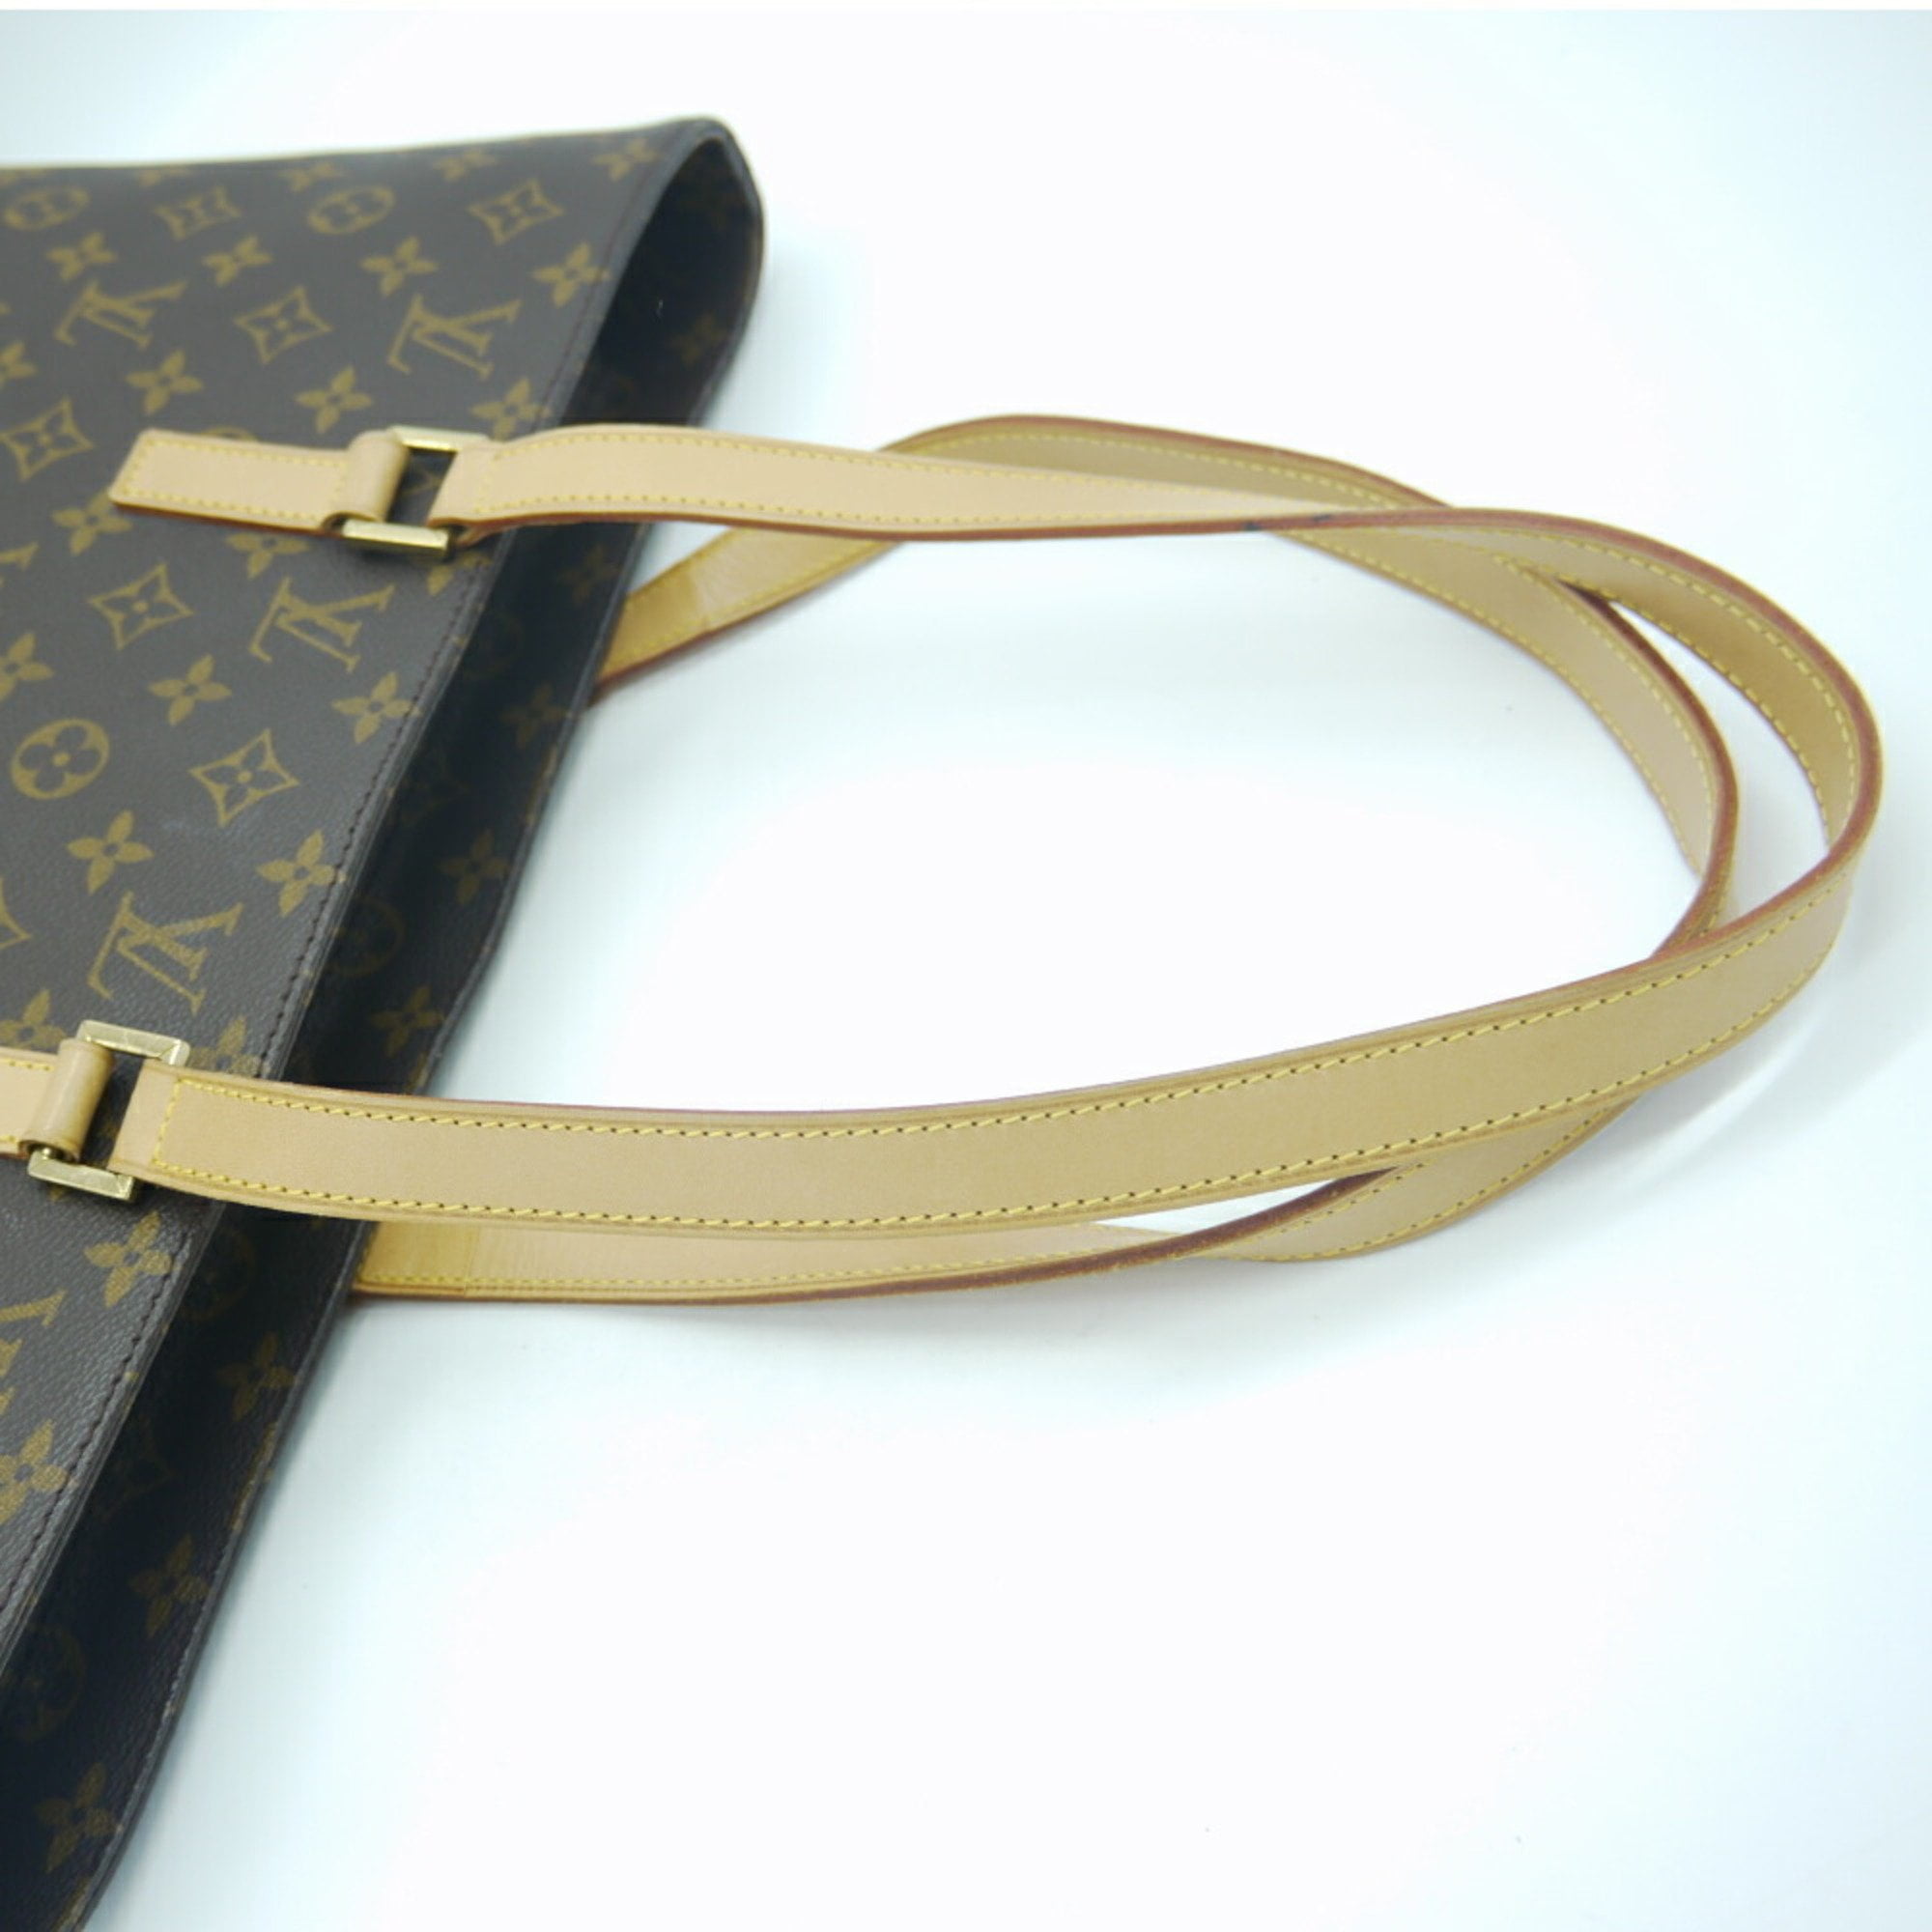 Authenticated Used LOUIS VUITTON Louis Vuitton Luco monogram tote